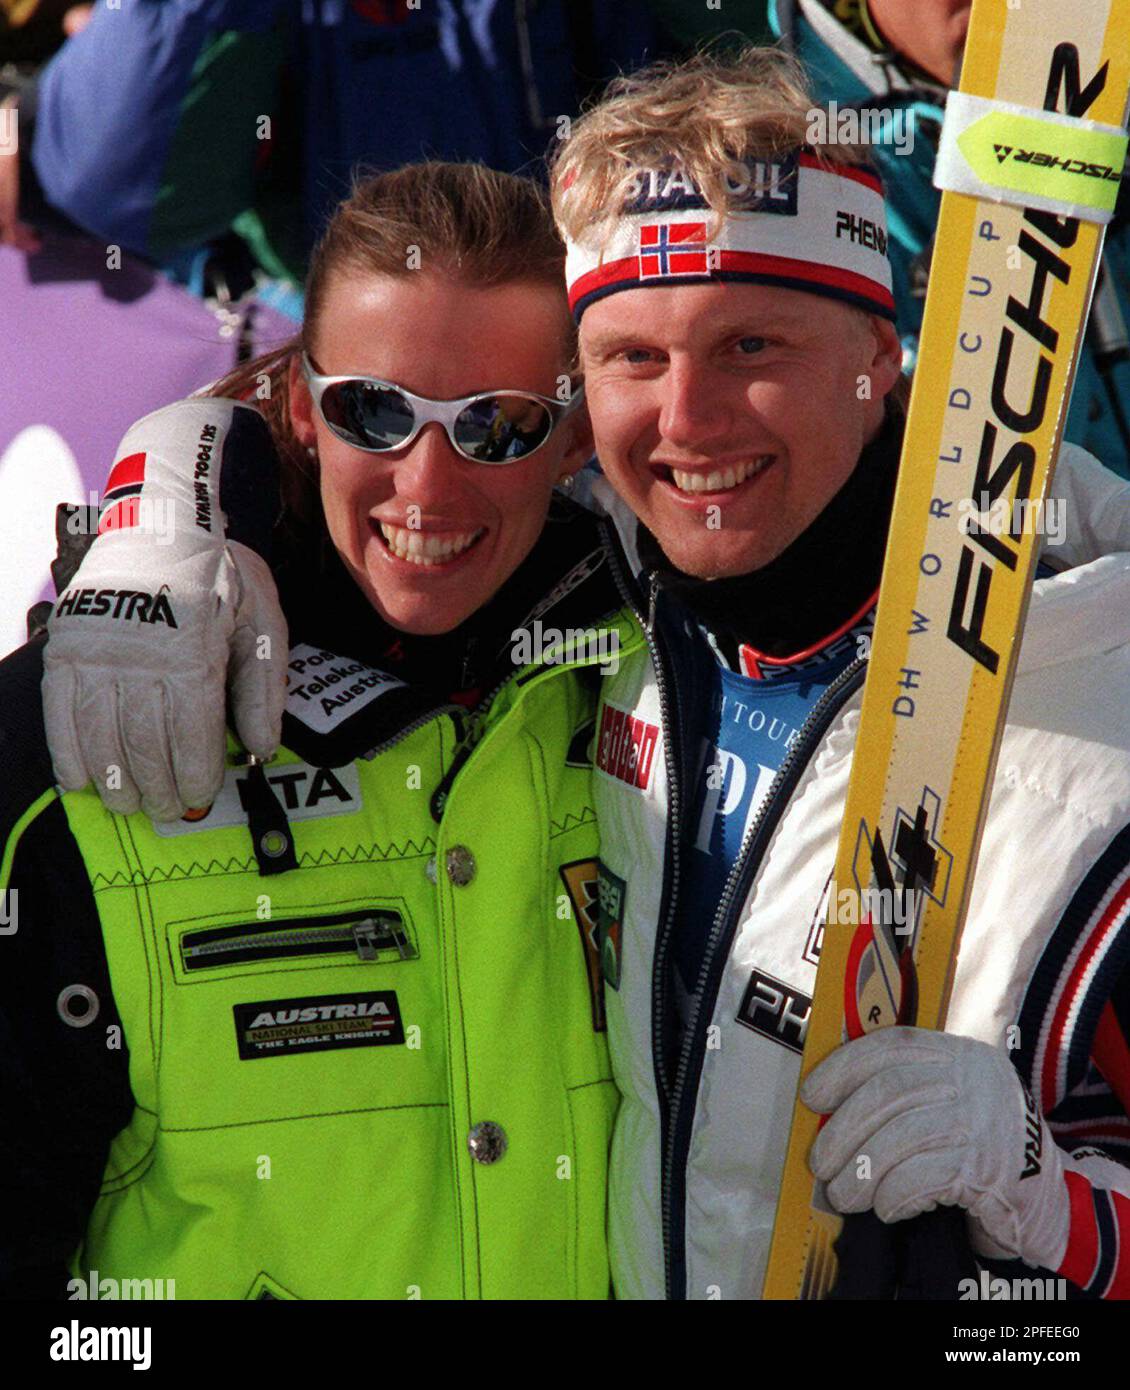 Norway's Atle Skaardal gold medalist in the men's super giant slalom at the  World Alpine Ski Championships poses with his Austrian girlfriend Karin  Koellerer in the finish area in Sestriere Monday Feb.